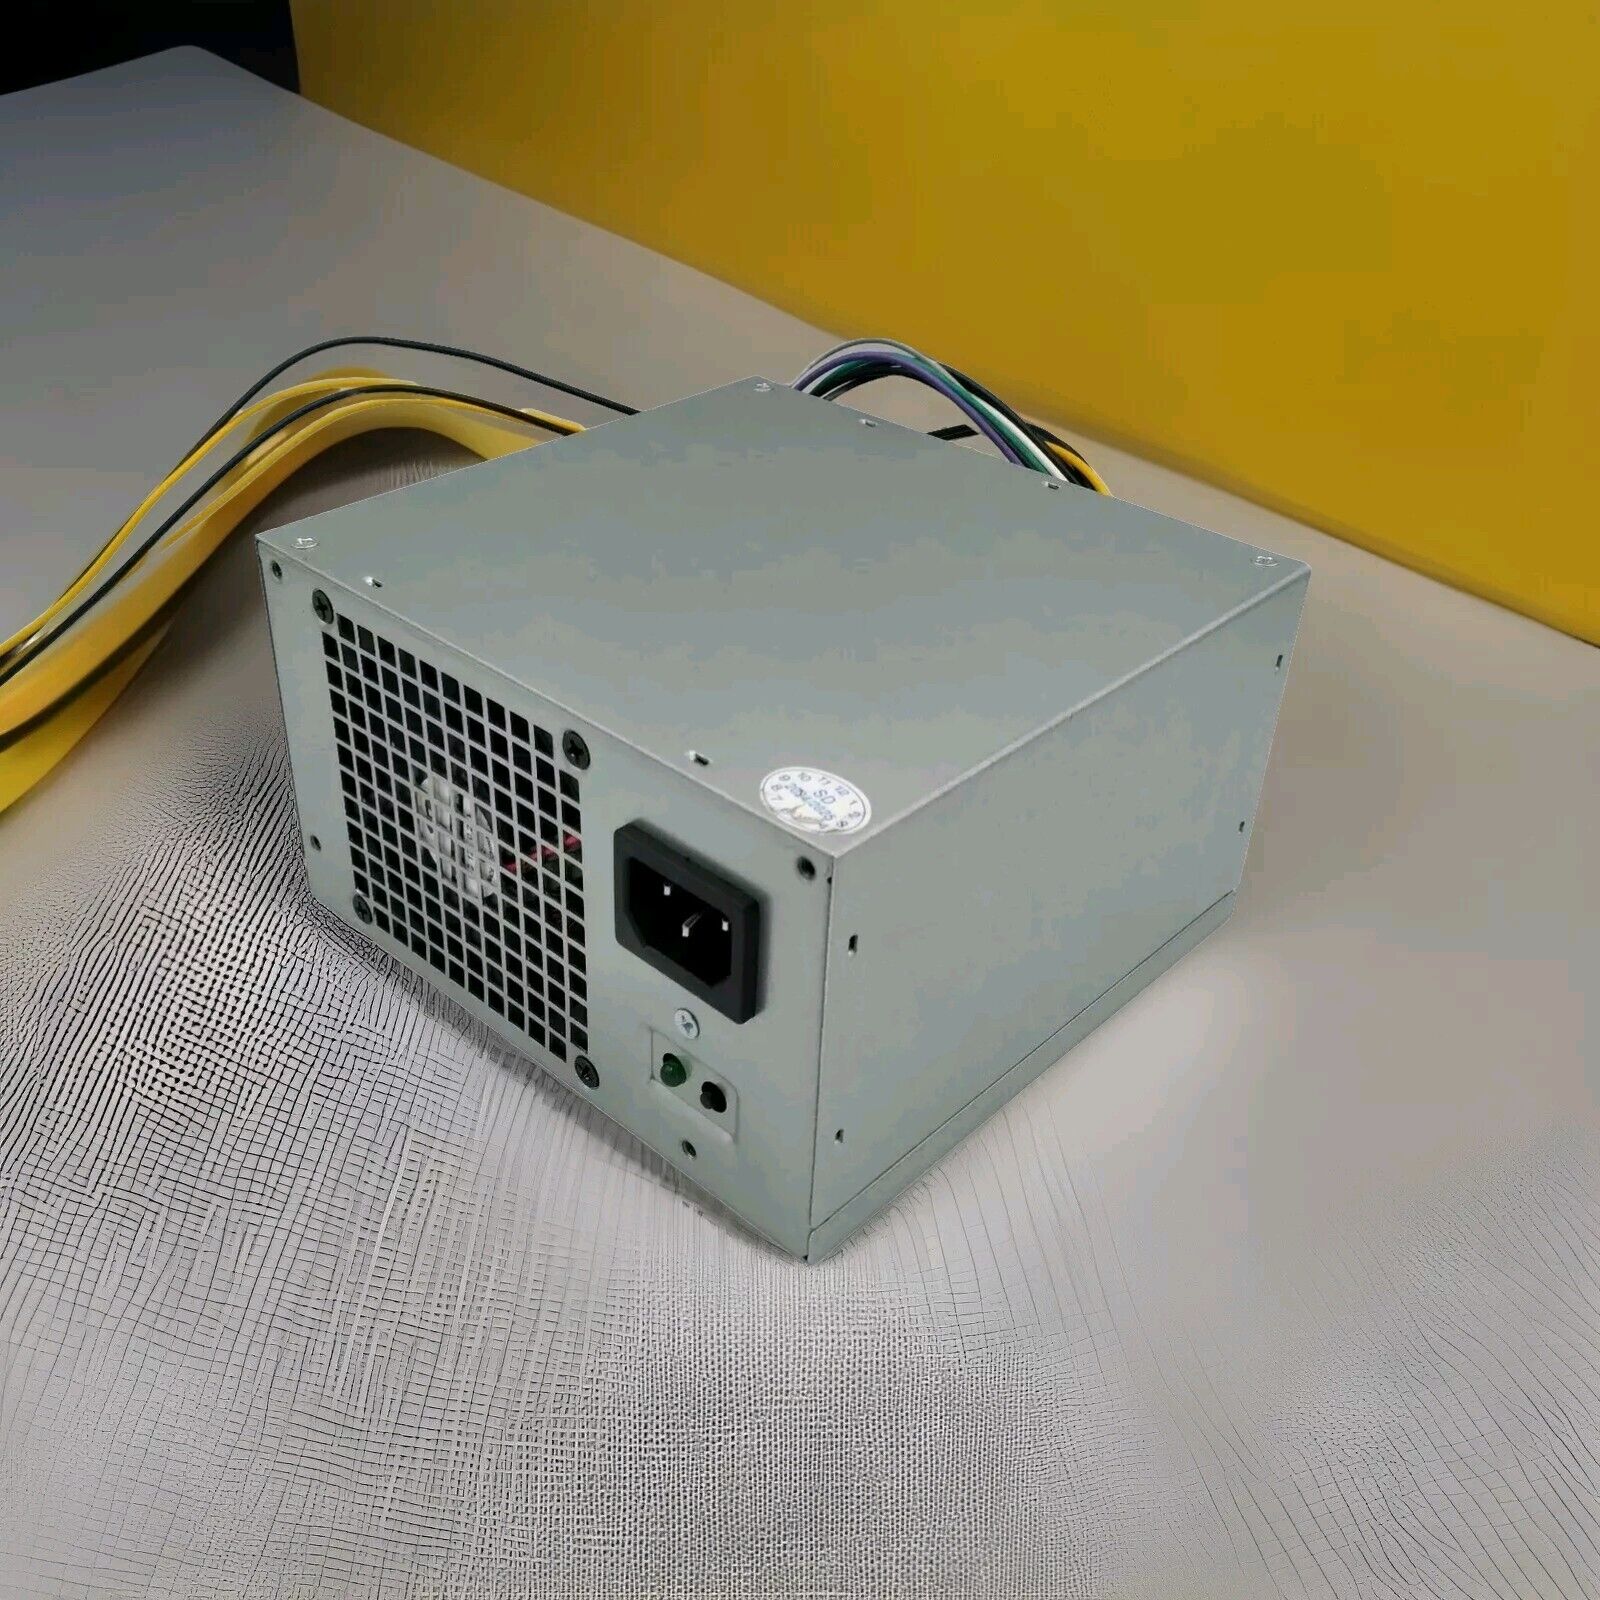 PSU Power Supply 290W Model Number L290BM-00 Replacement for Dell Optiplex 3020